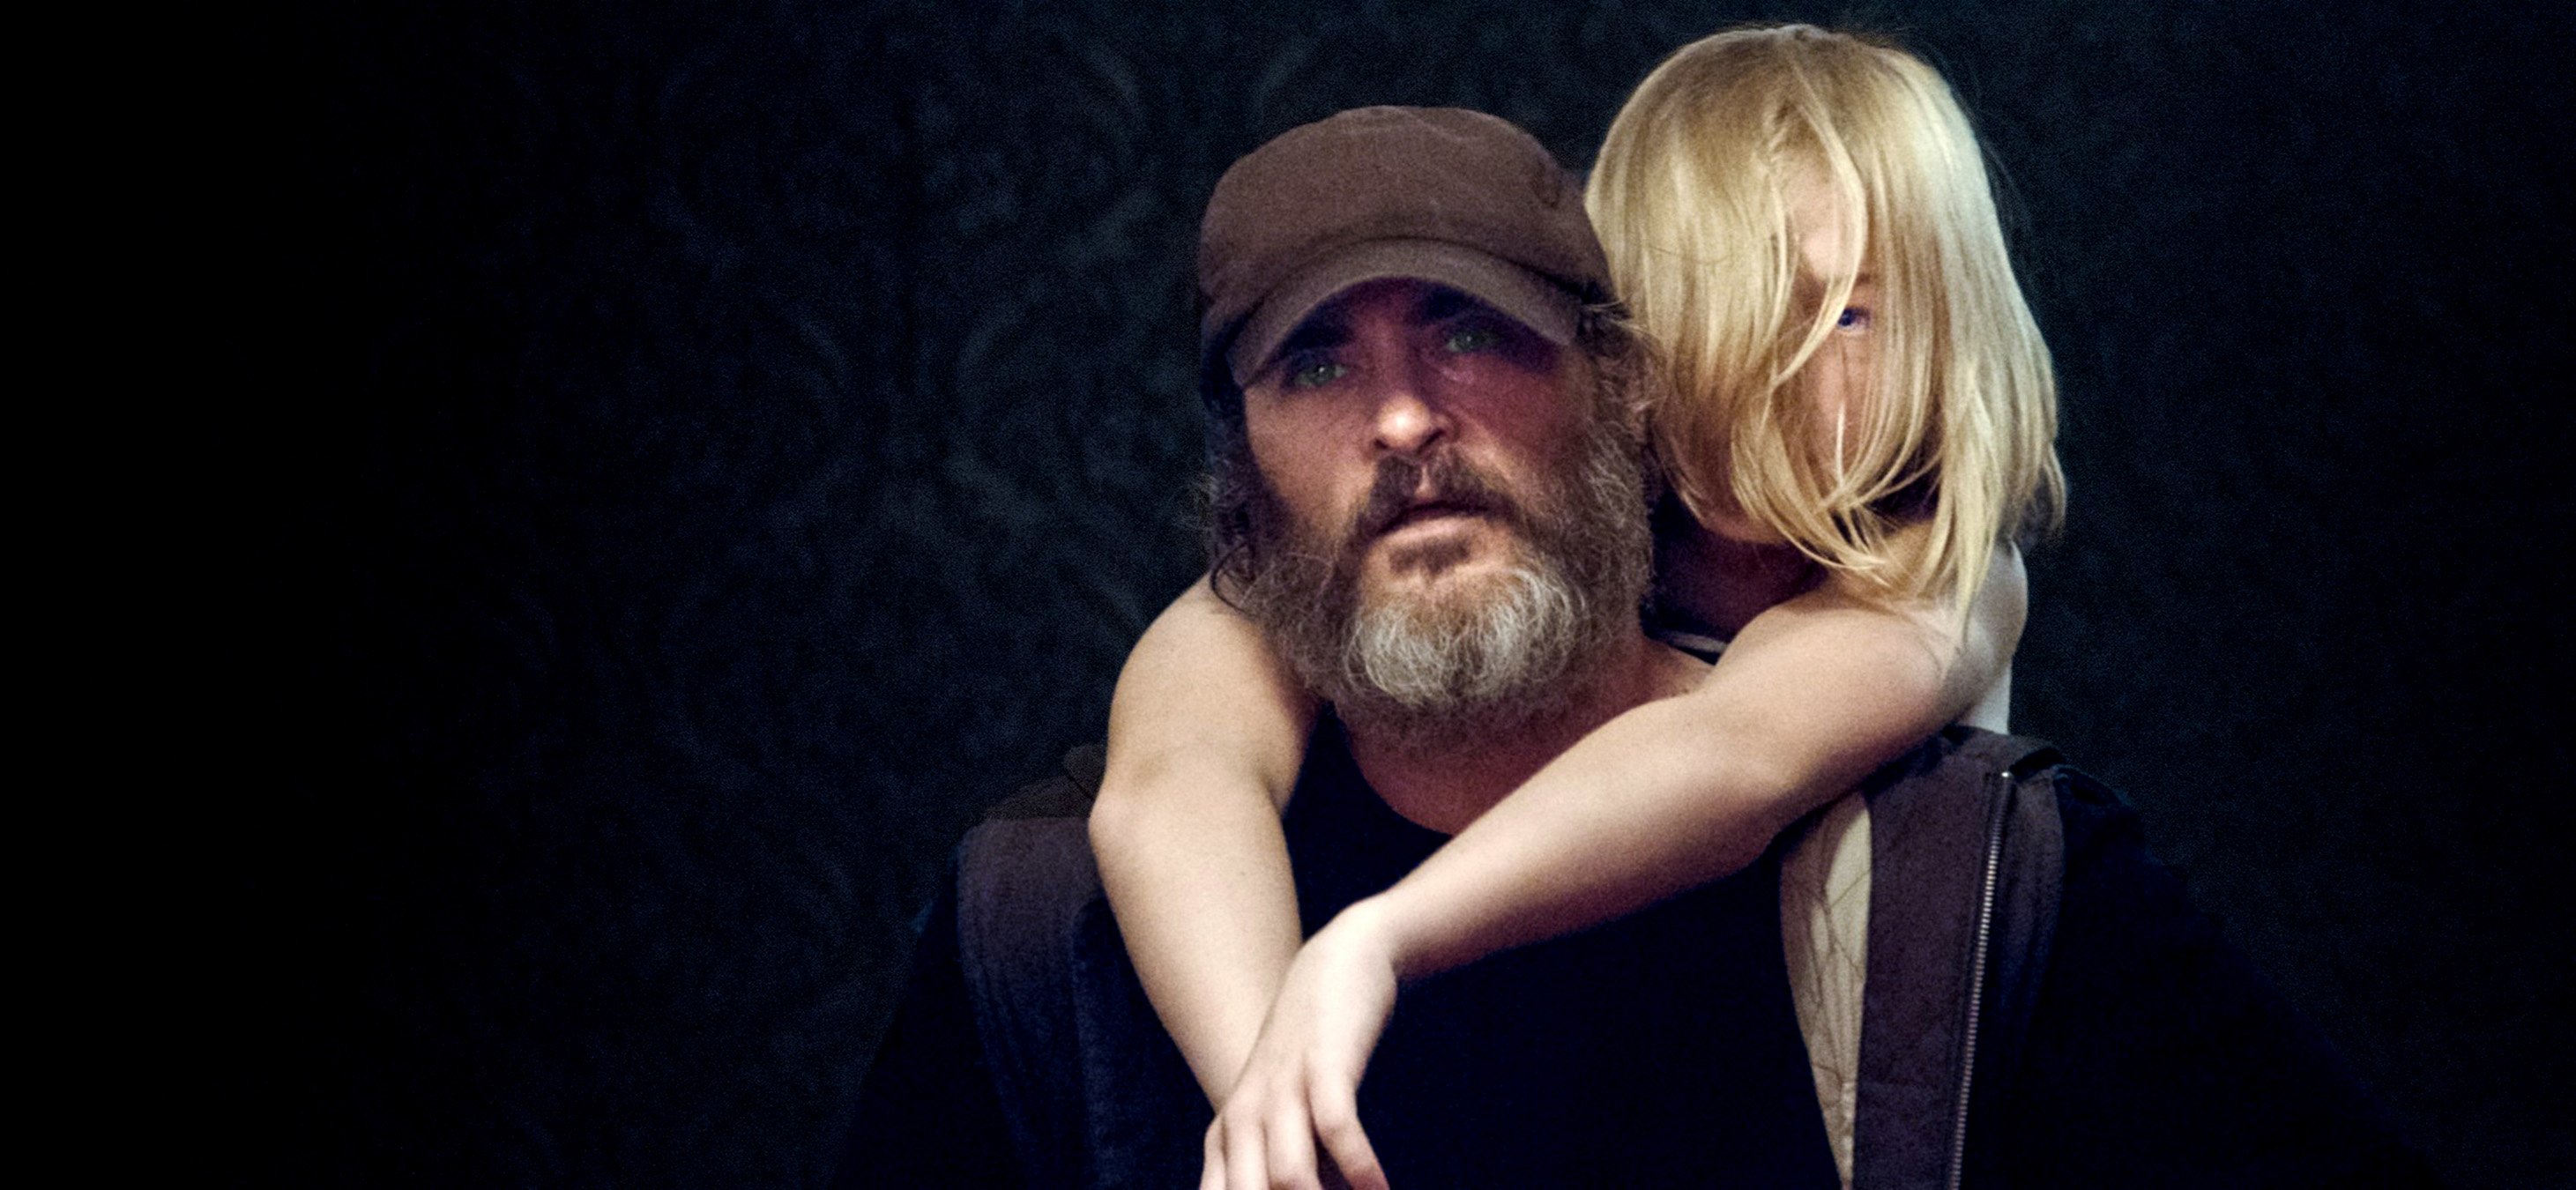 Sundance 2018, part 2: Valladares' take on 'Hale County,' 'You Were Never Really Here,' 'Leave No Trace'